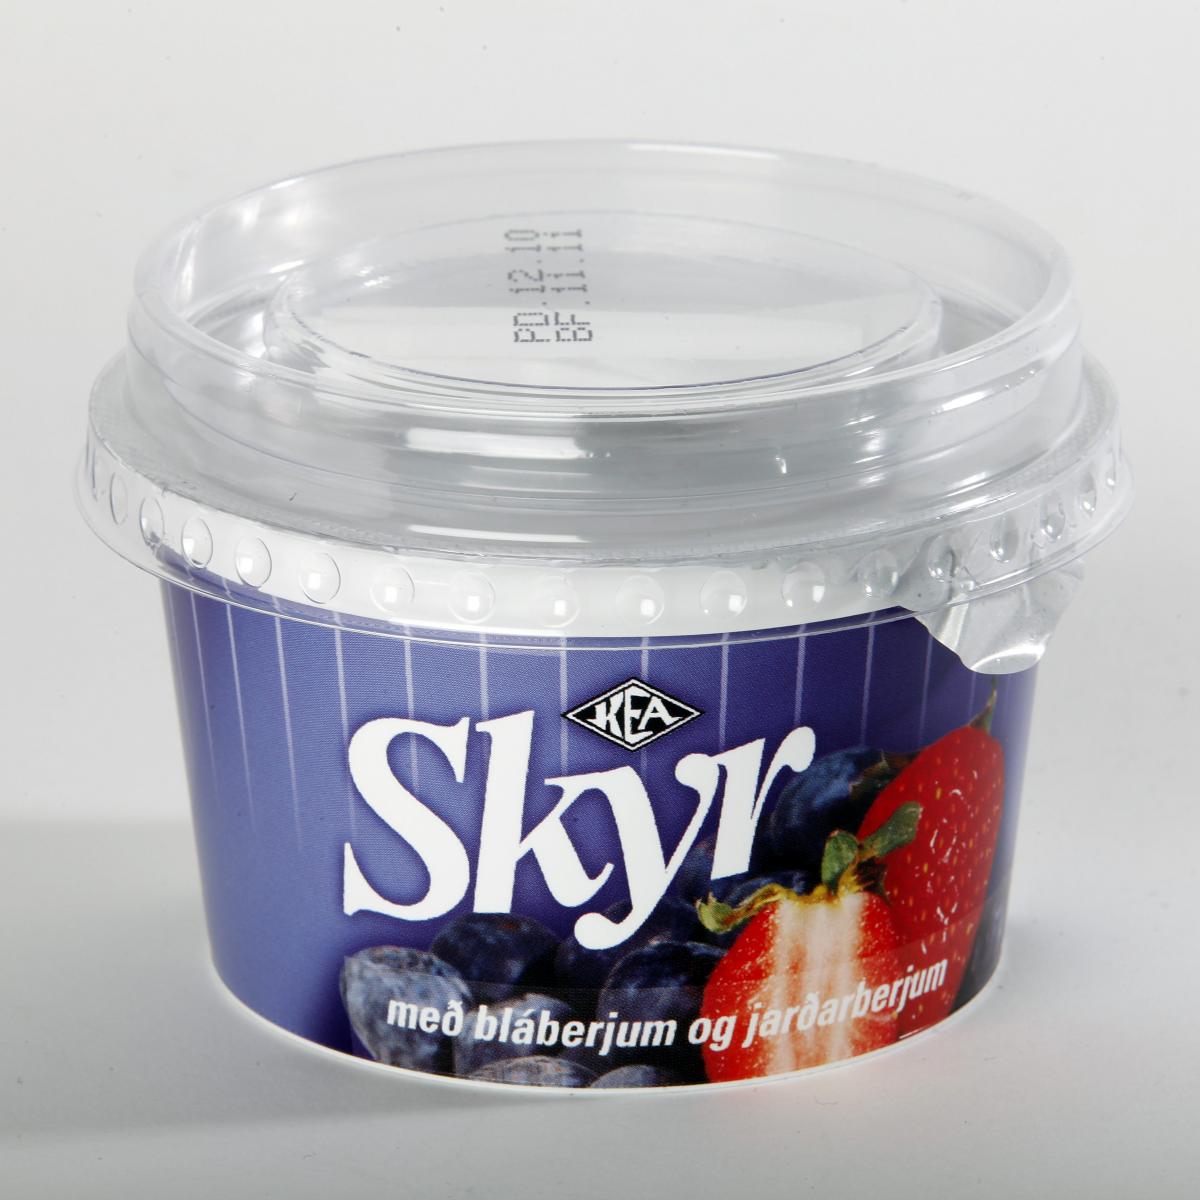 What Is Skyr and How Is It Made?